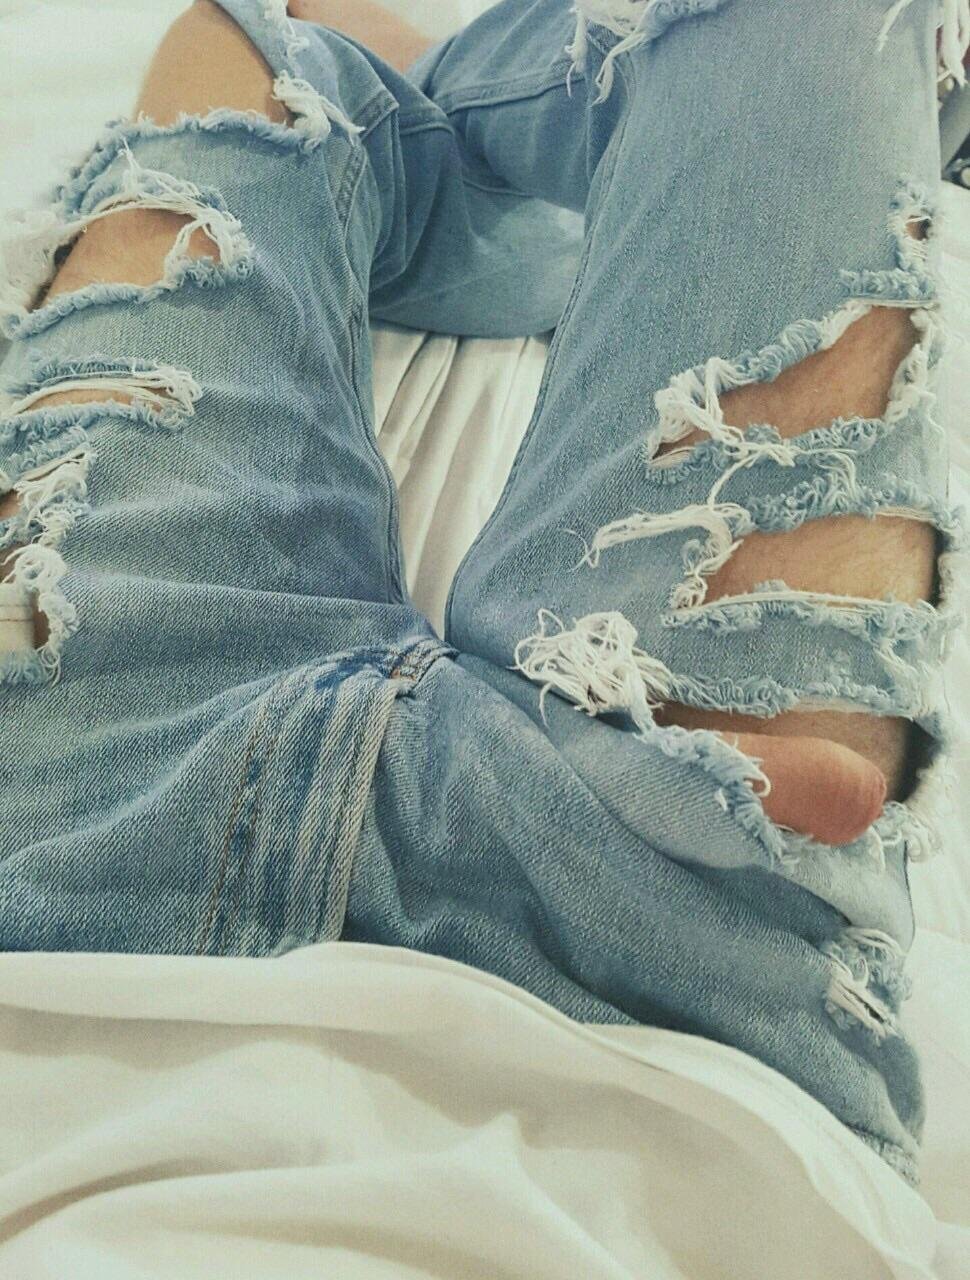 Don’t freeball in ripped jeans.